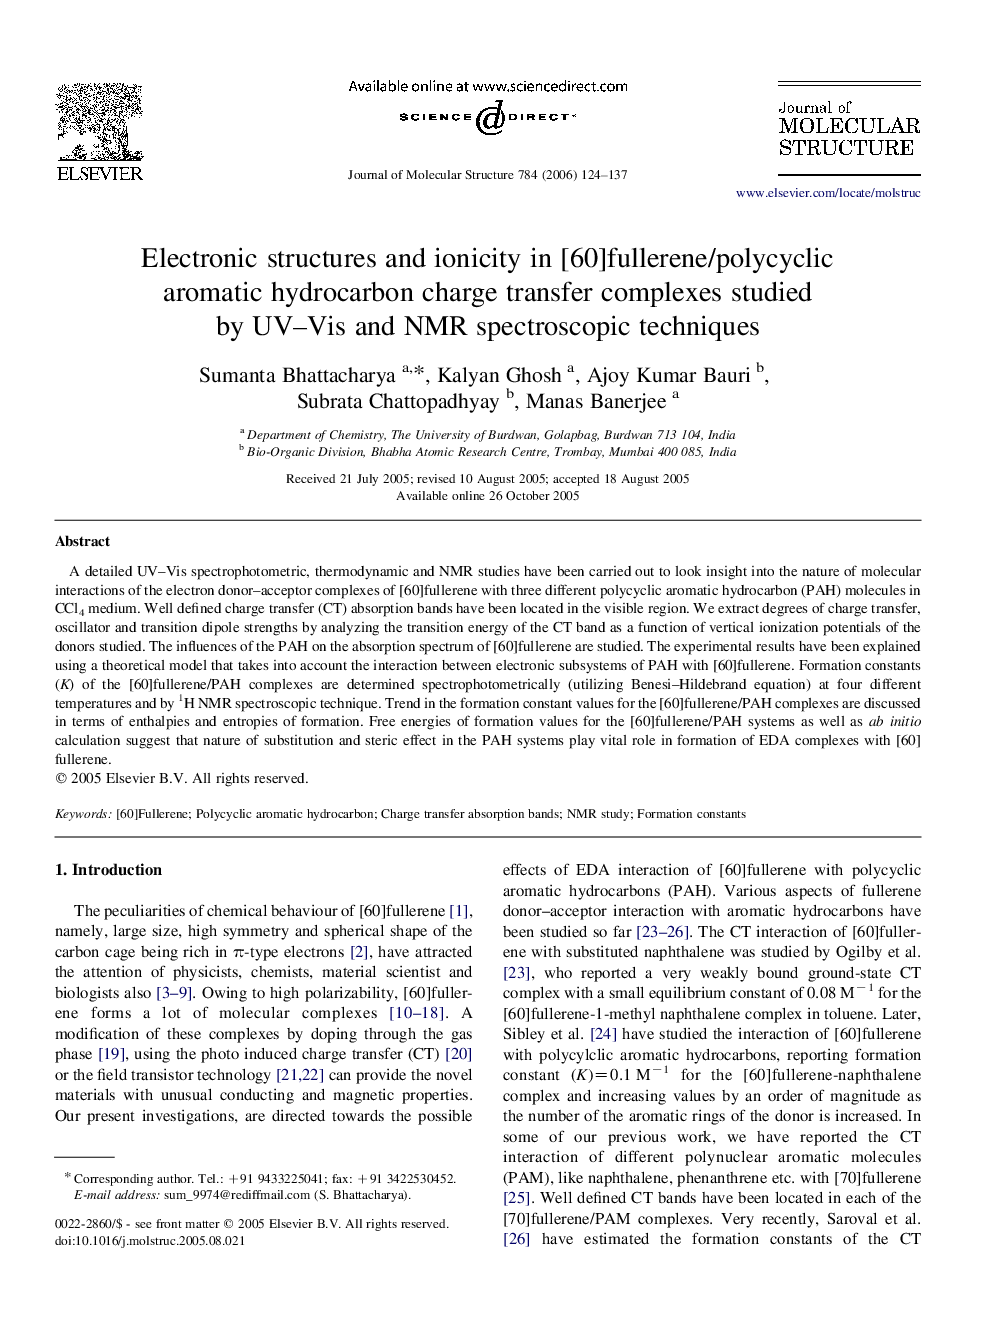 Electronic structures and ionicity in [60]fullerene/polycyclic aromatic hydrocarbon charge transfer complexes studied by UV–Vis and NMR spectroscopic techniques